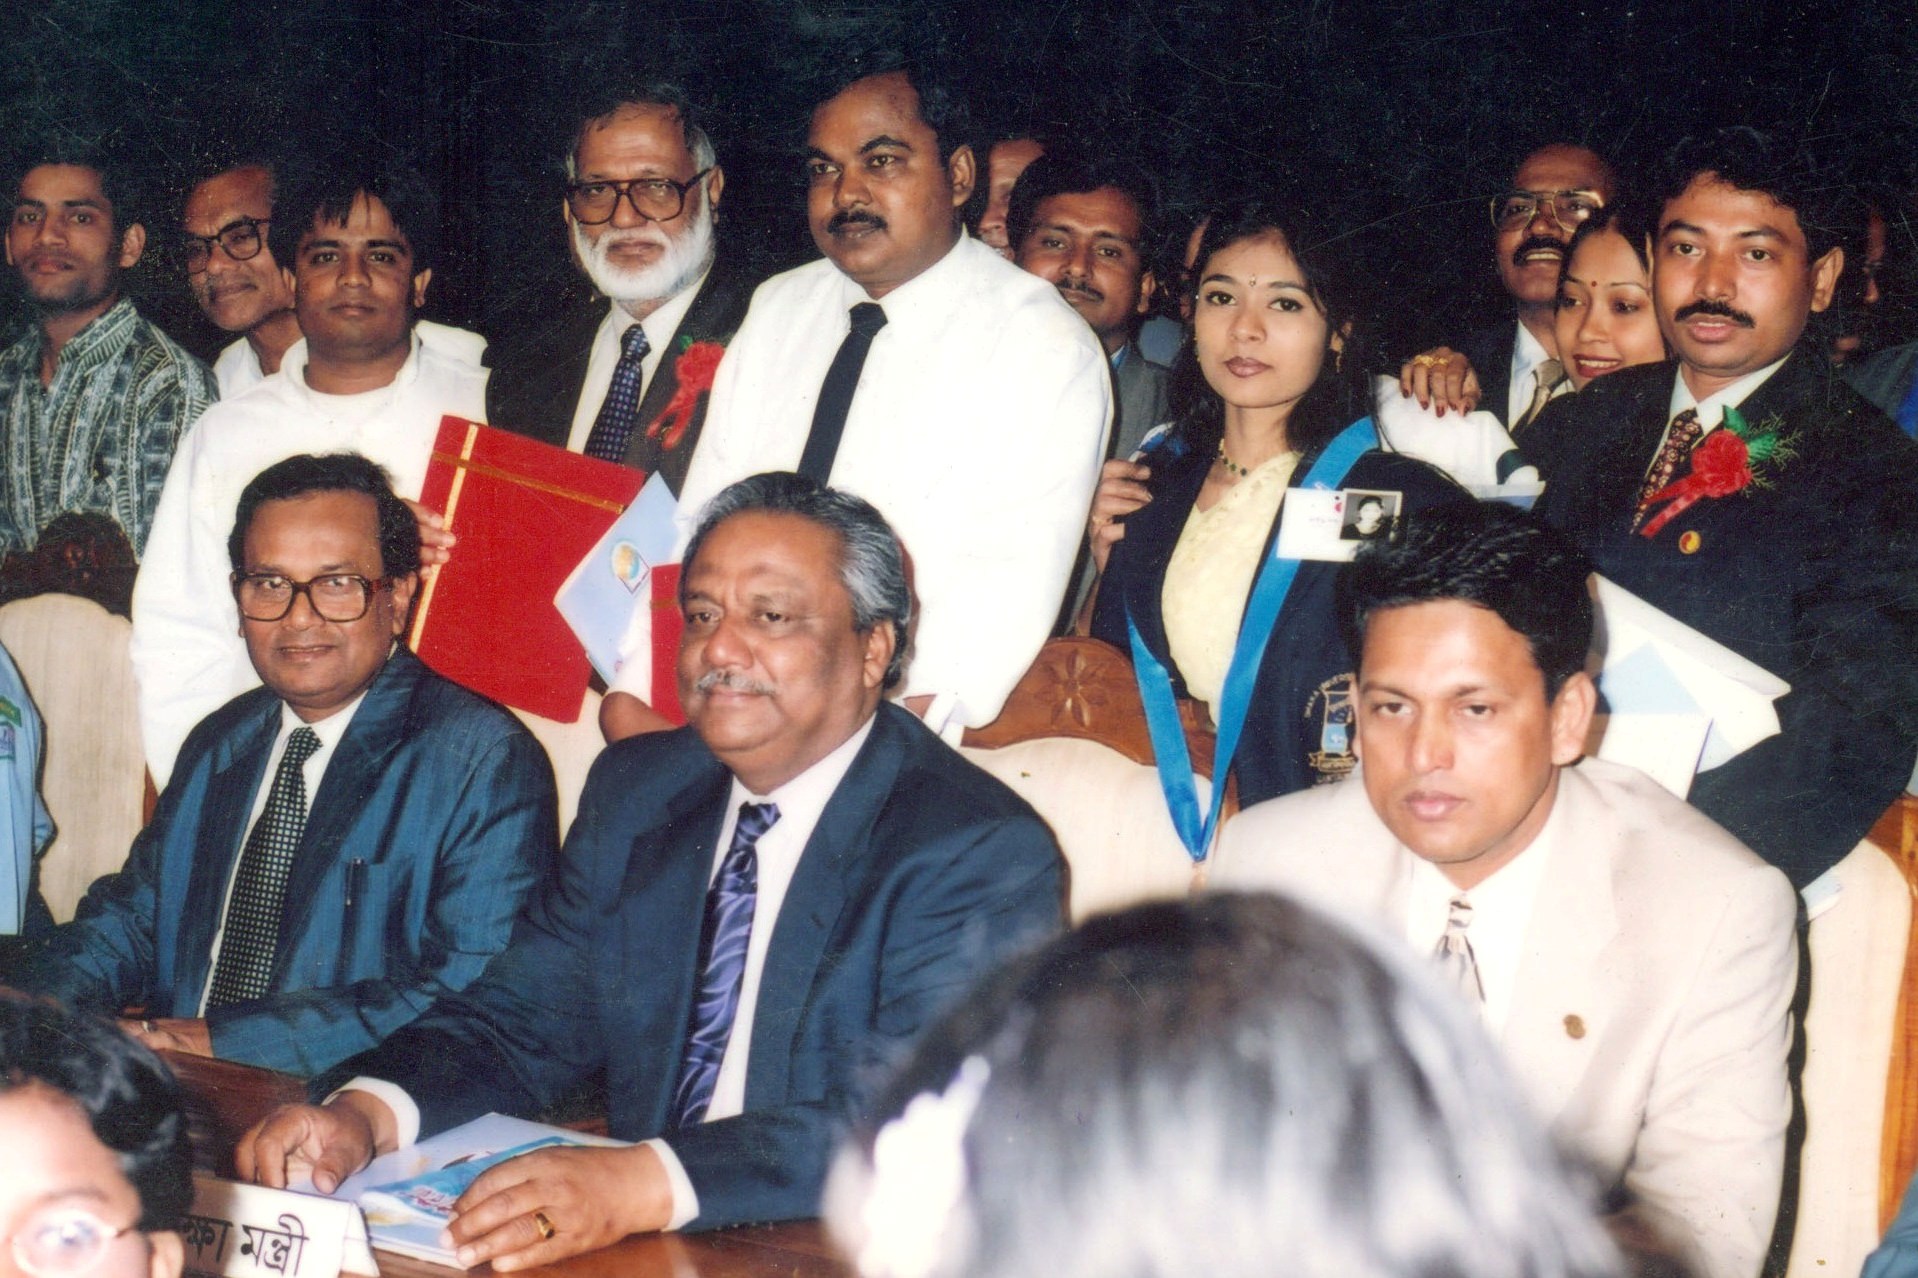  Best College 2002 Education Minister, Award receiver & Guests